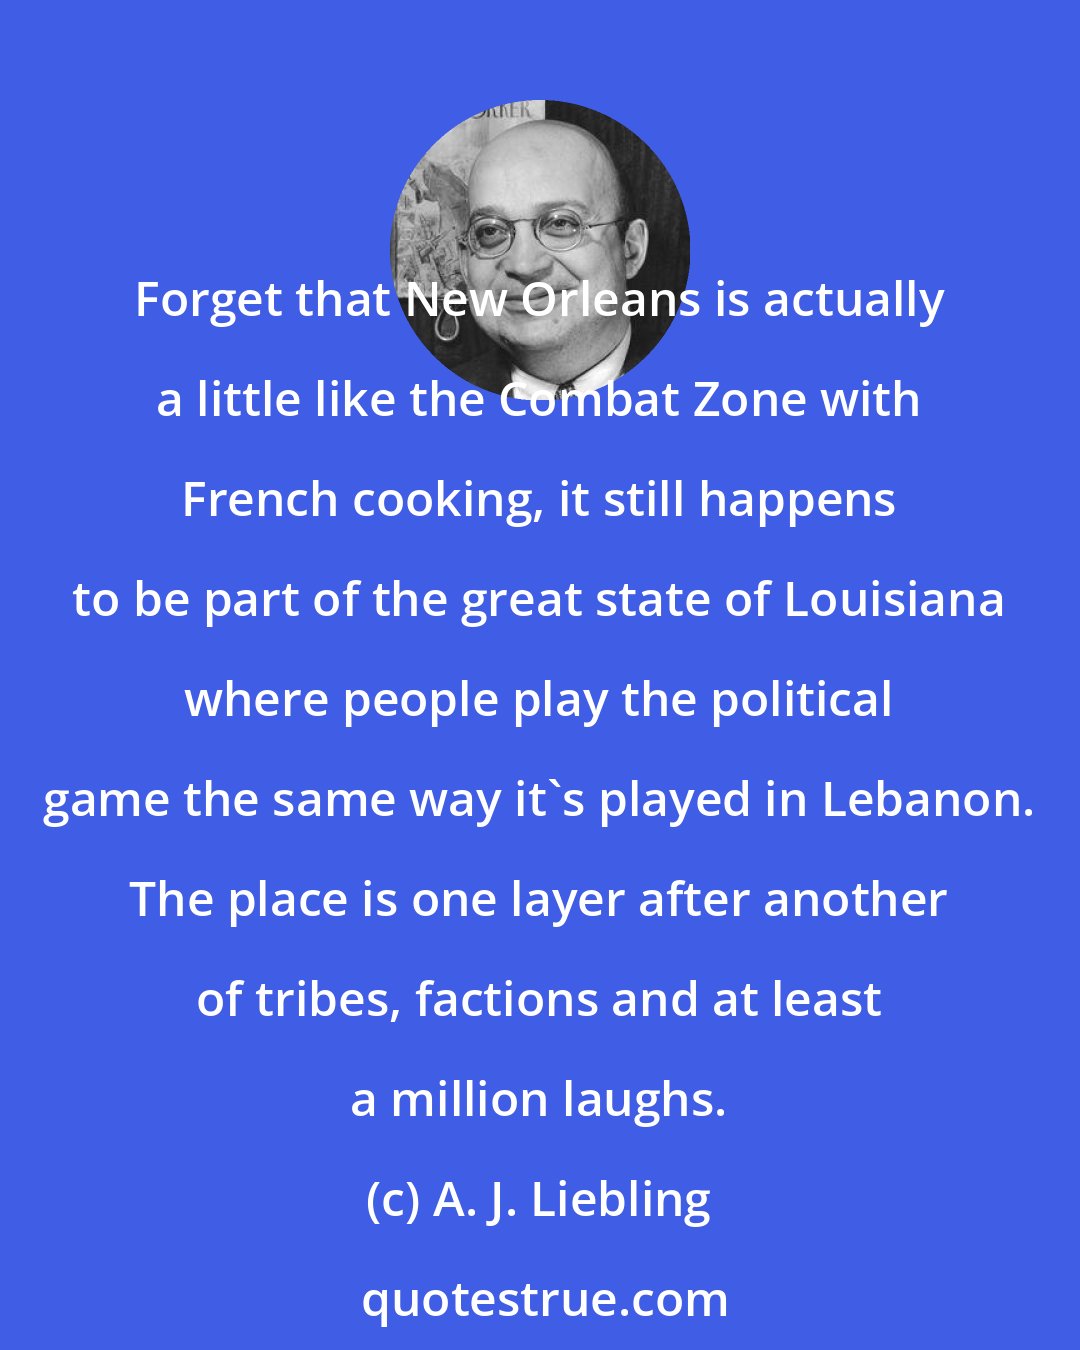 A. J. Liebling: Forget that New Orleans is actually a little like the Combat Zone with French cooking, it still happens to be part of the great state of Louisiana where people play the political game the same way it's played in Lebanon. The place is one layer after another of tribes, factions and at least a million laughs.